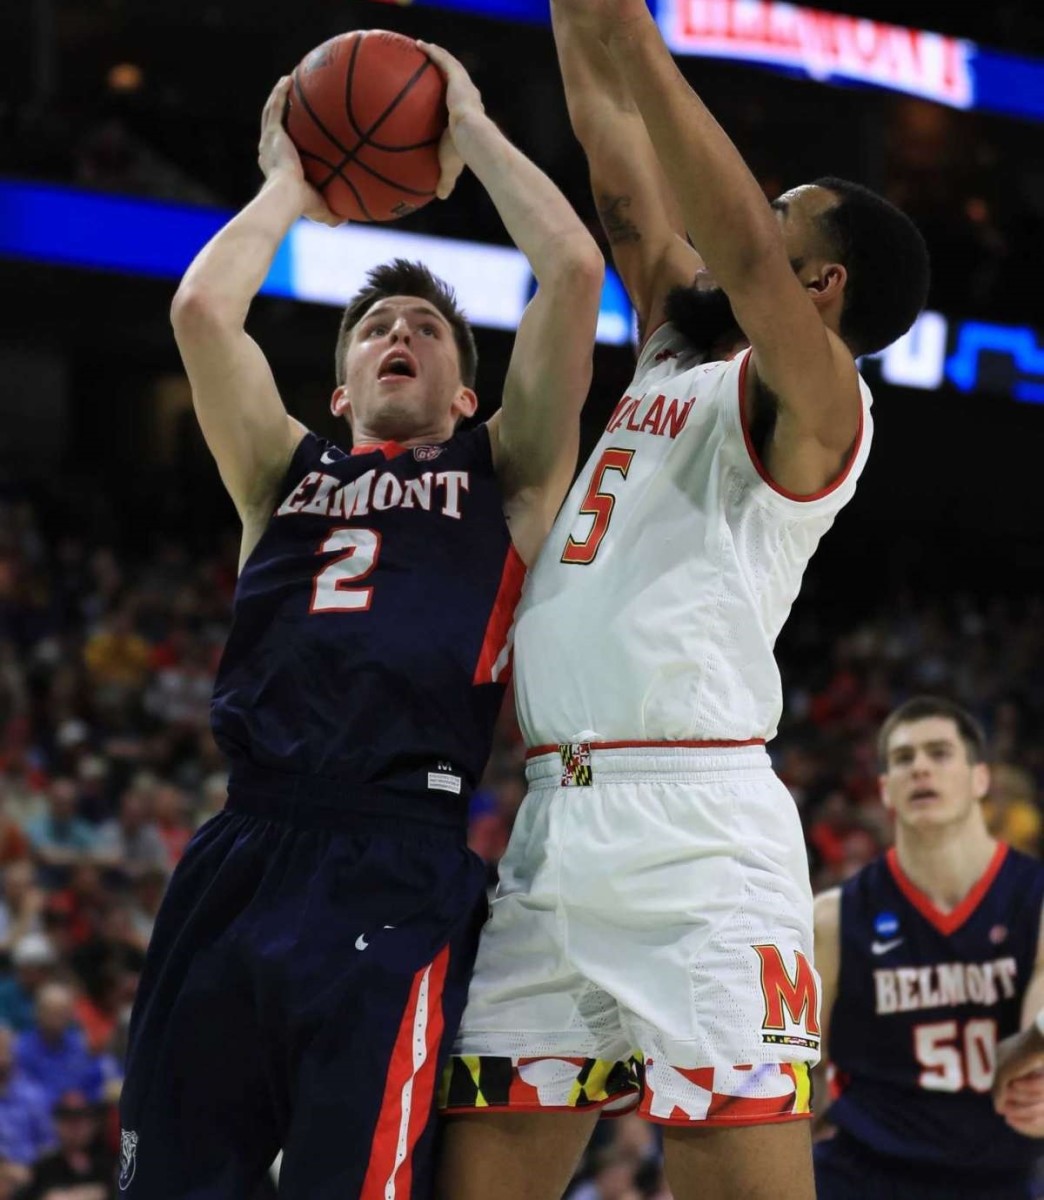 At 6-2, Grayson Murphy pulls in 8 rebounds a game for Belmont.